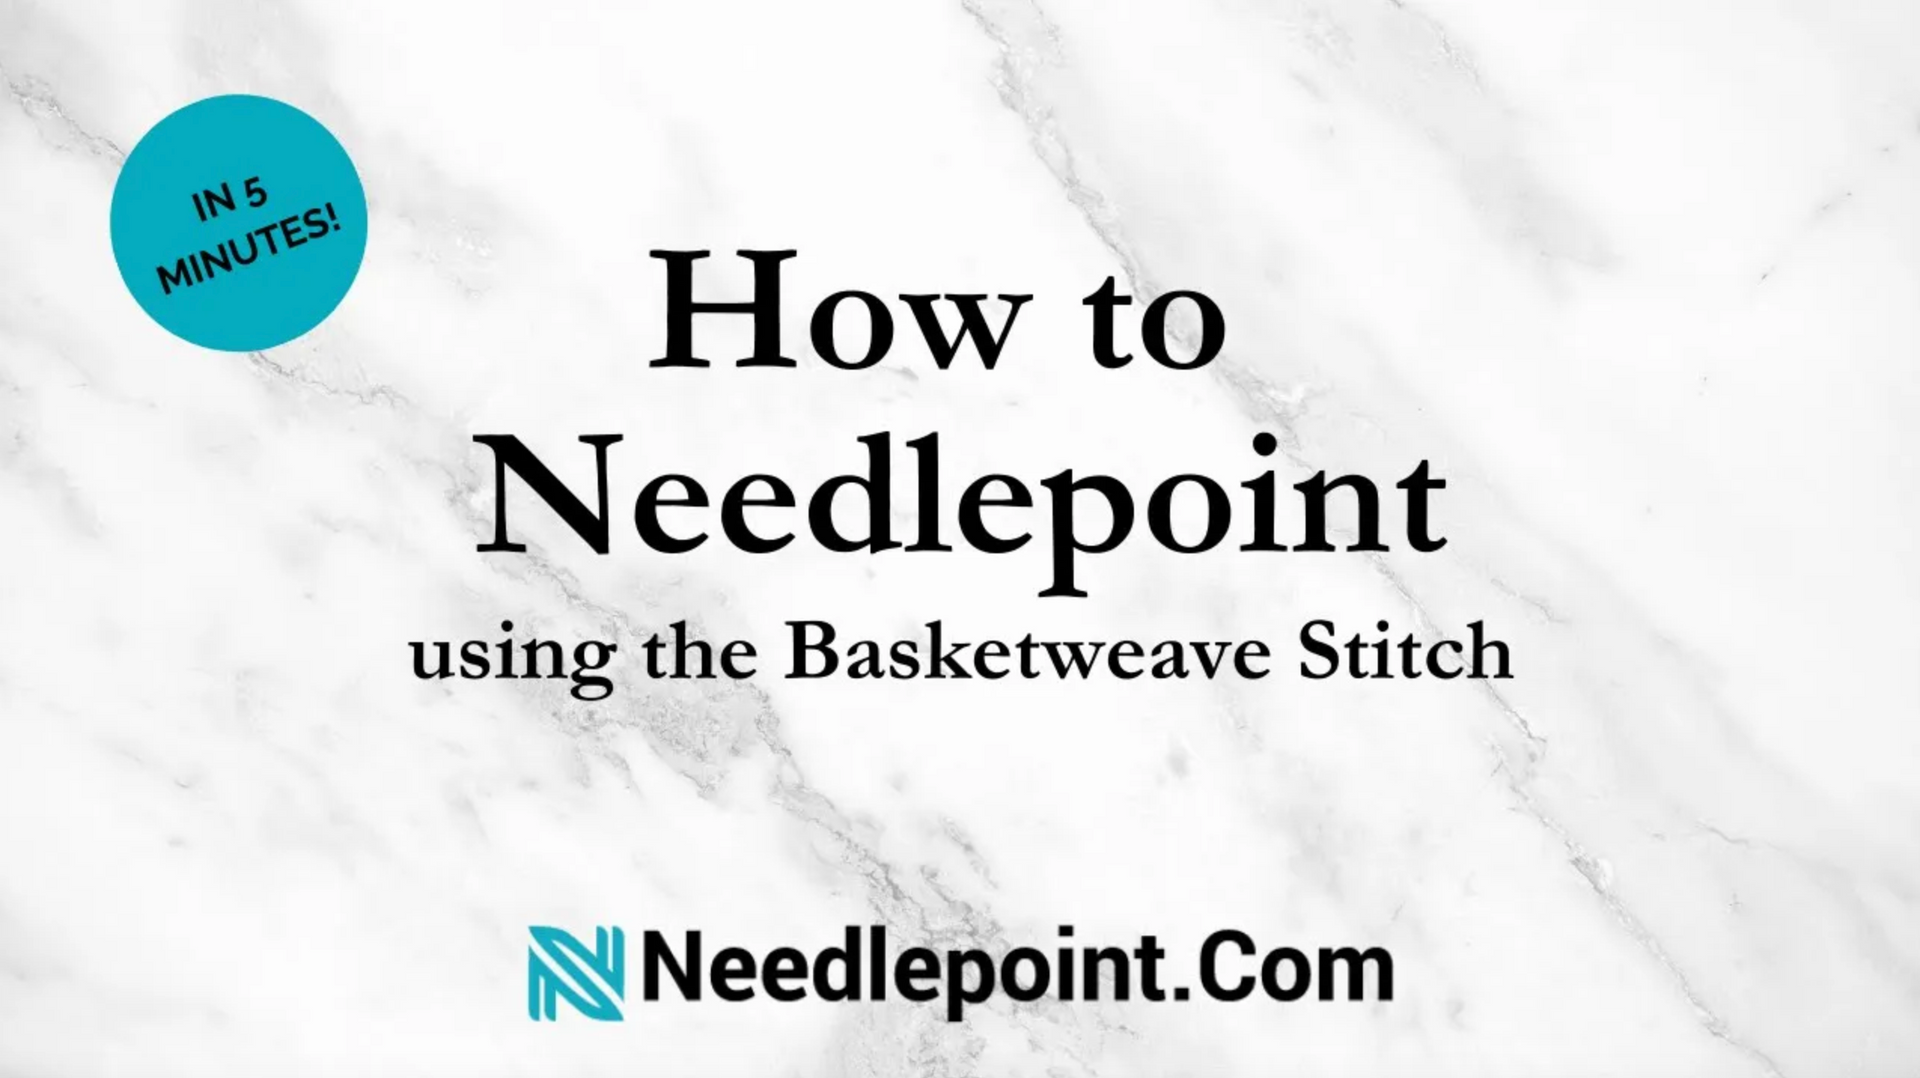 Load video: Learn how to needlepoint in 5 minutes